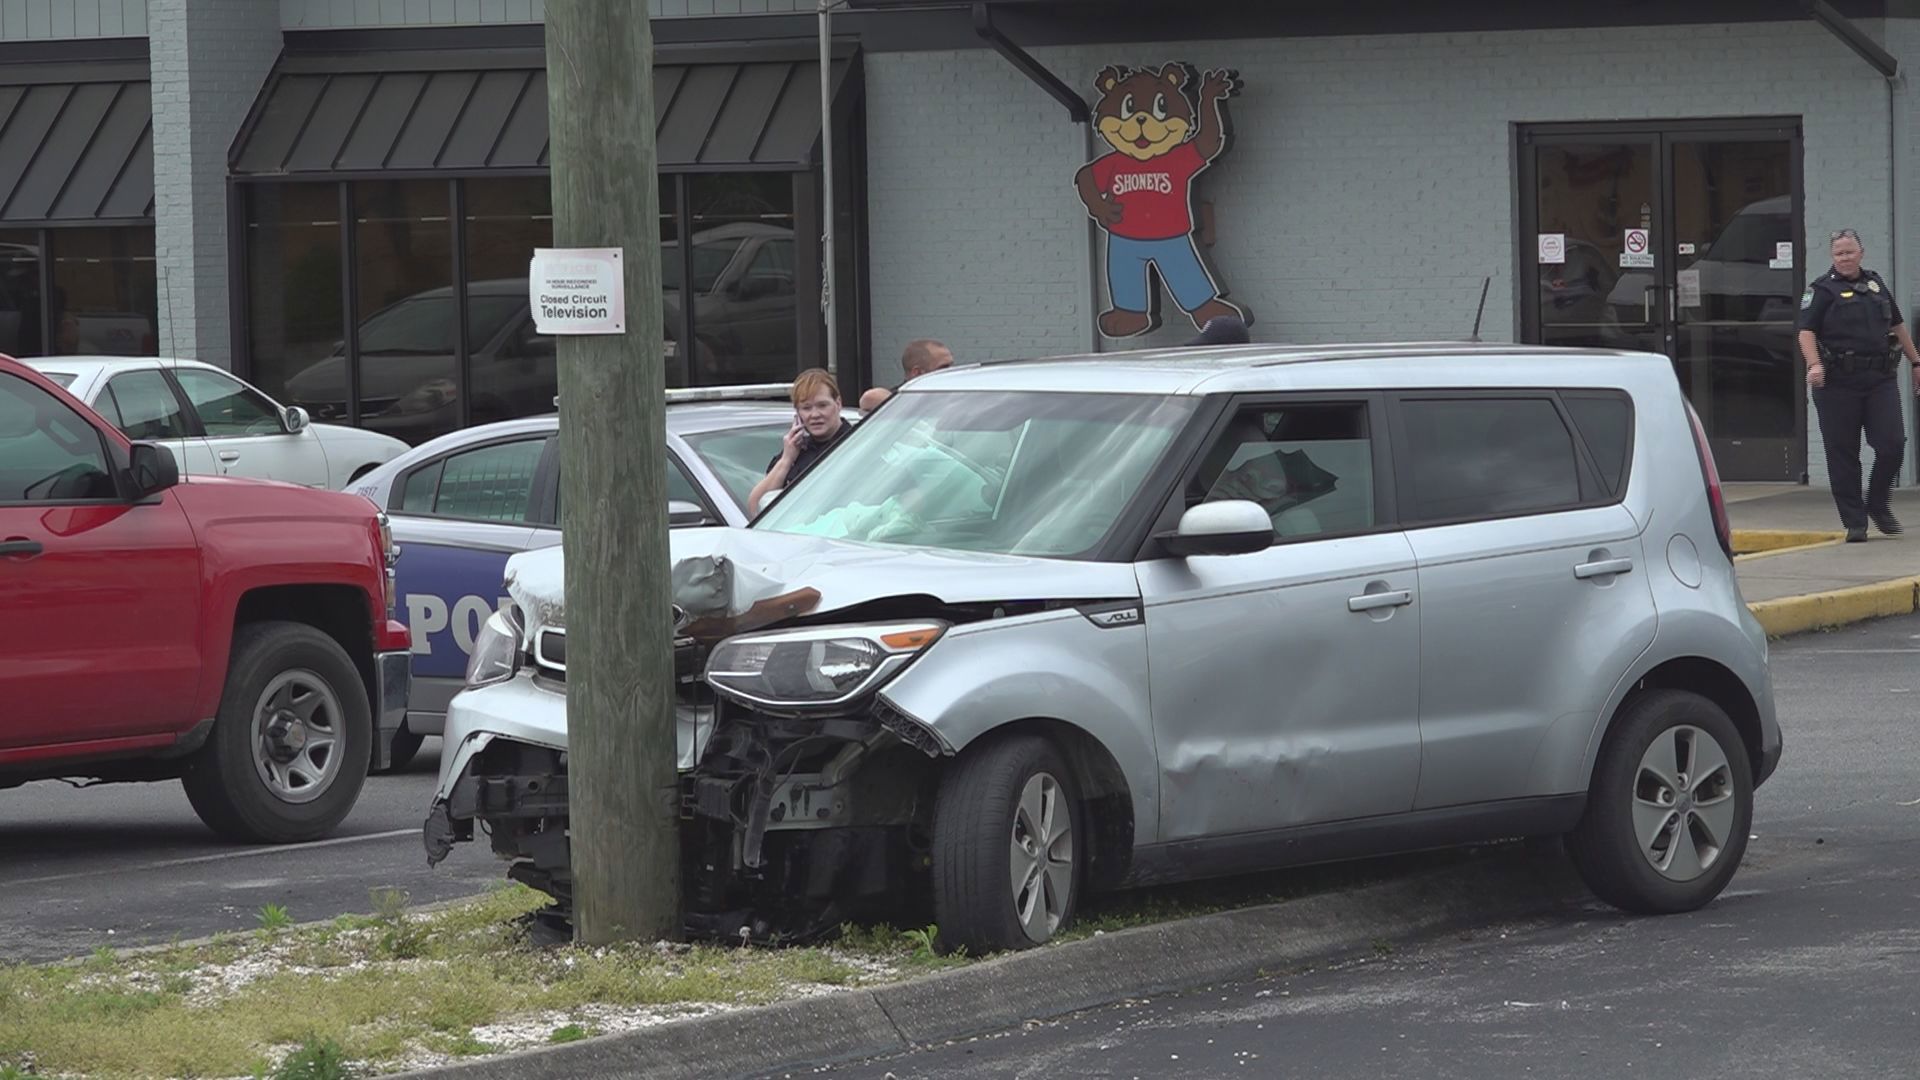 The Knoxville Police Department said officers tried to stop the car when it crashed outside the restaurant Tuesday afternoon.